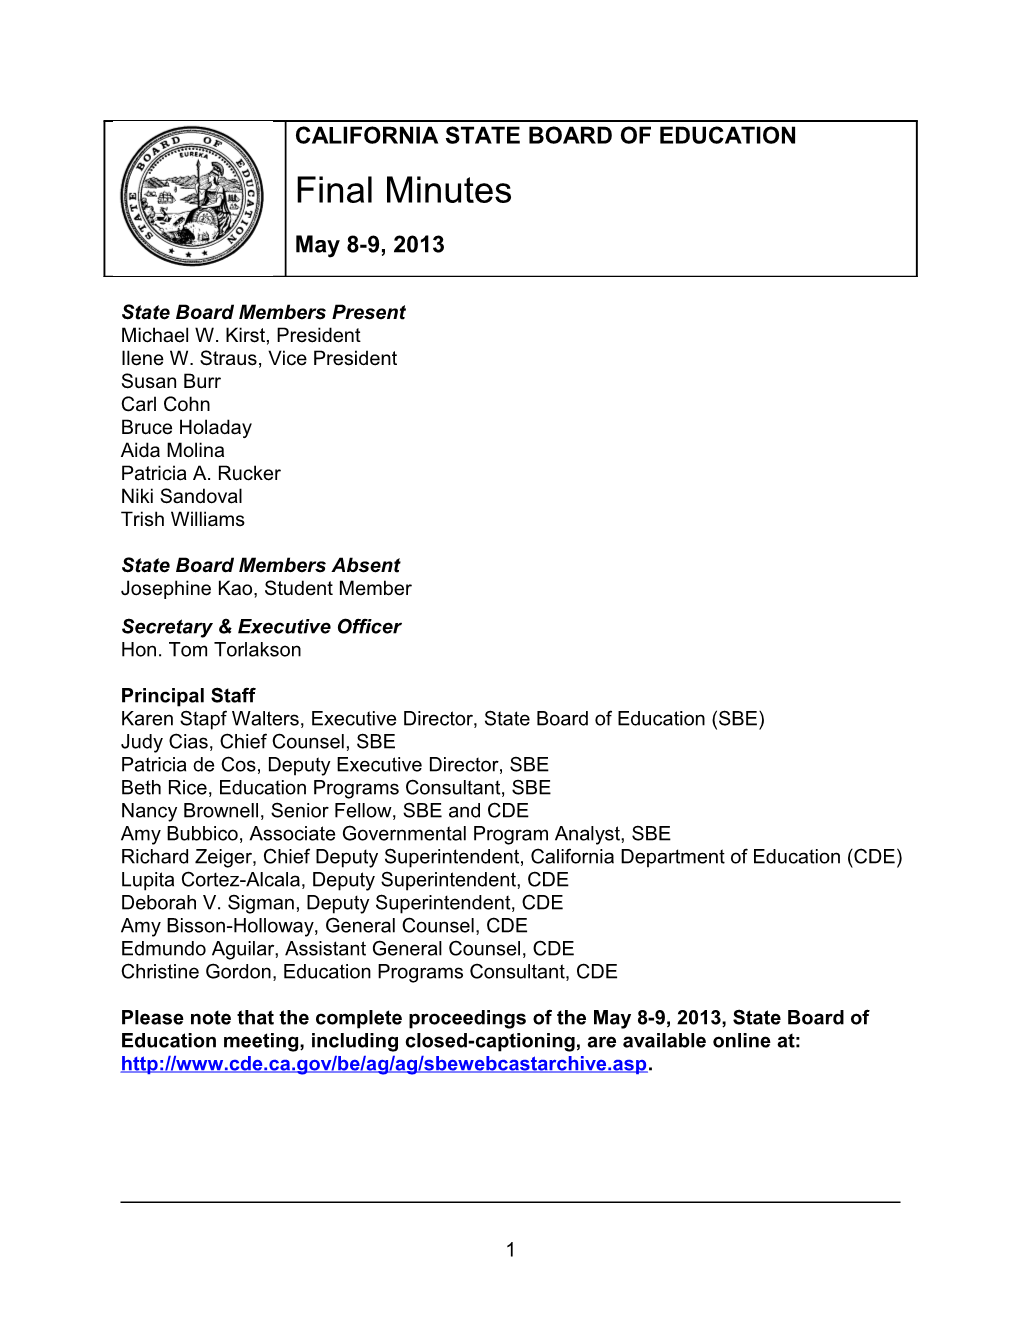 Final Minutes May 8-9, 2013 - SBE Minutes (CA State Board of Education)